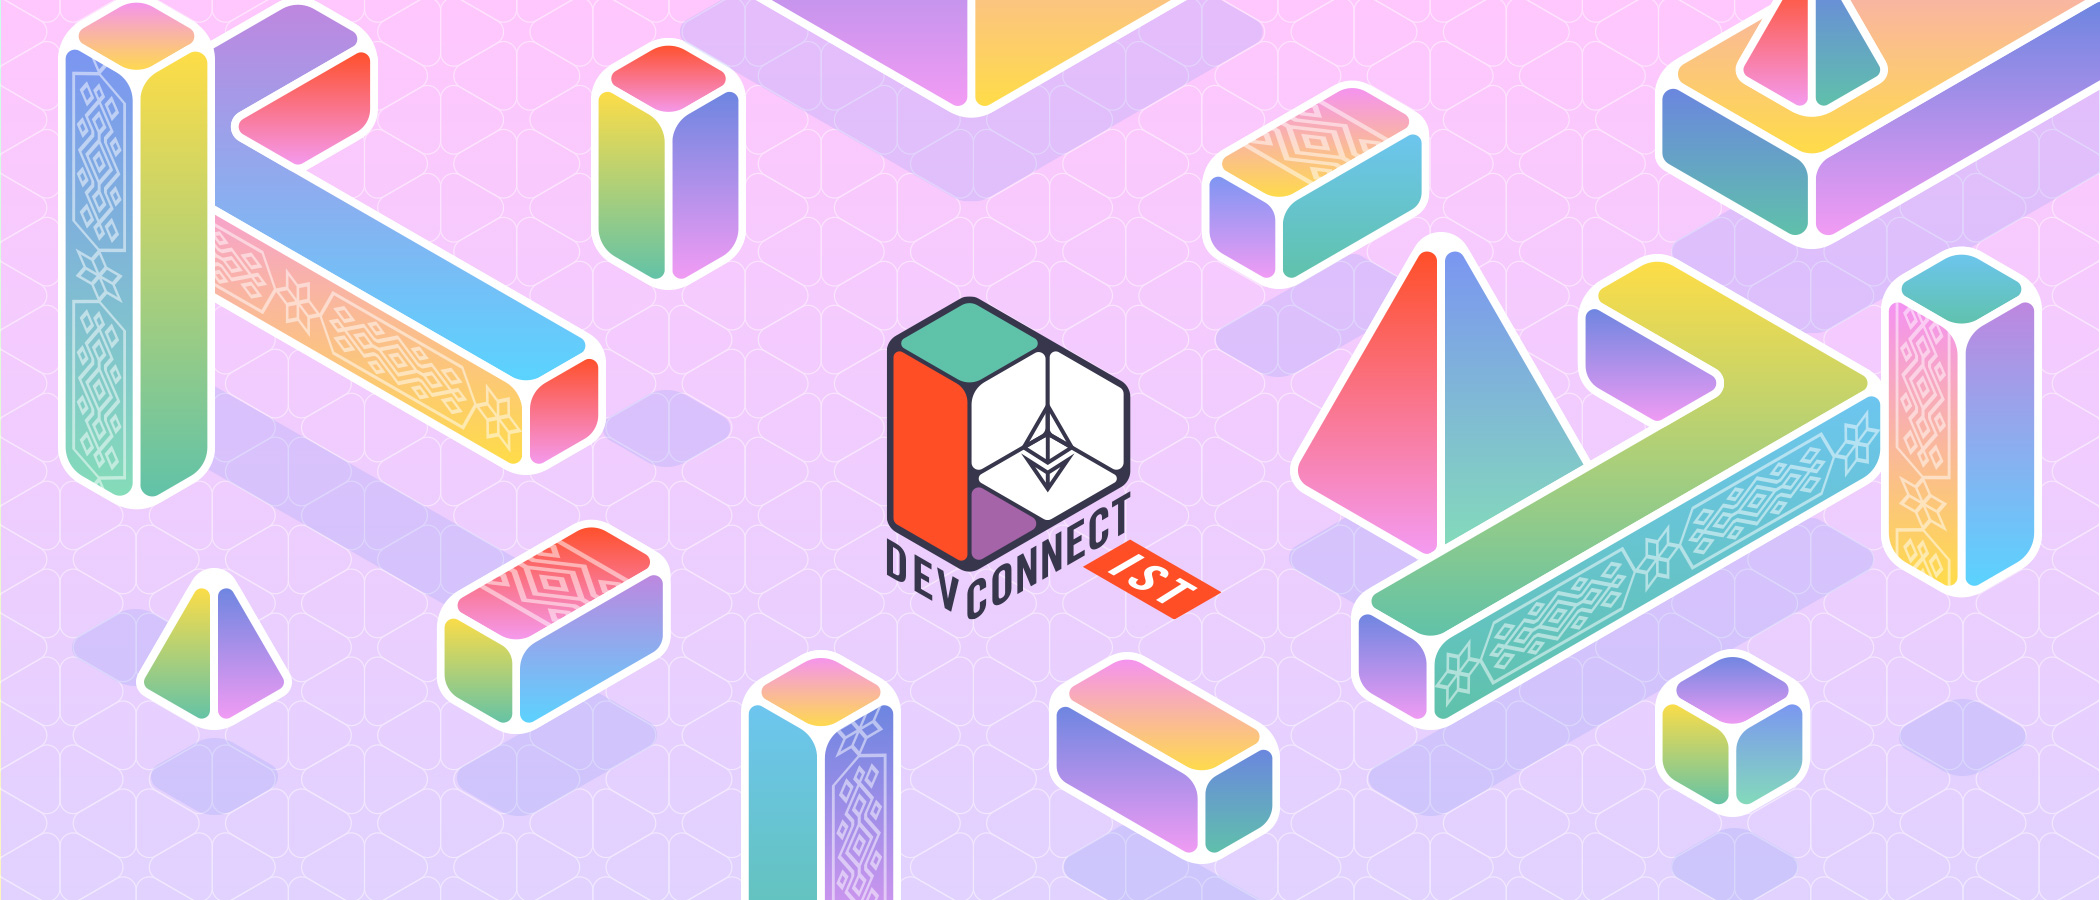 We Will Be At Devconnect Soon!